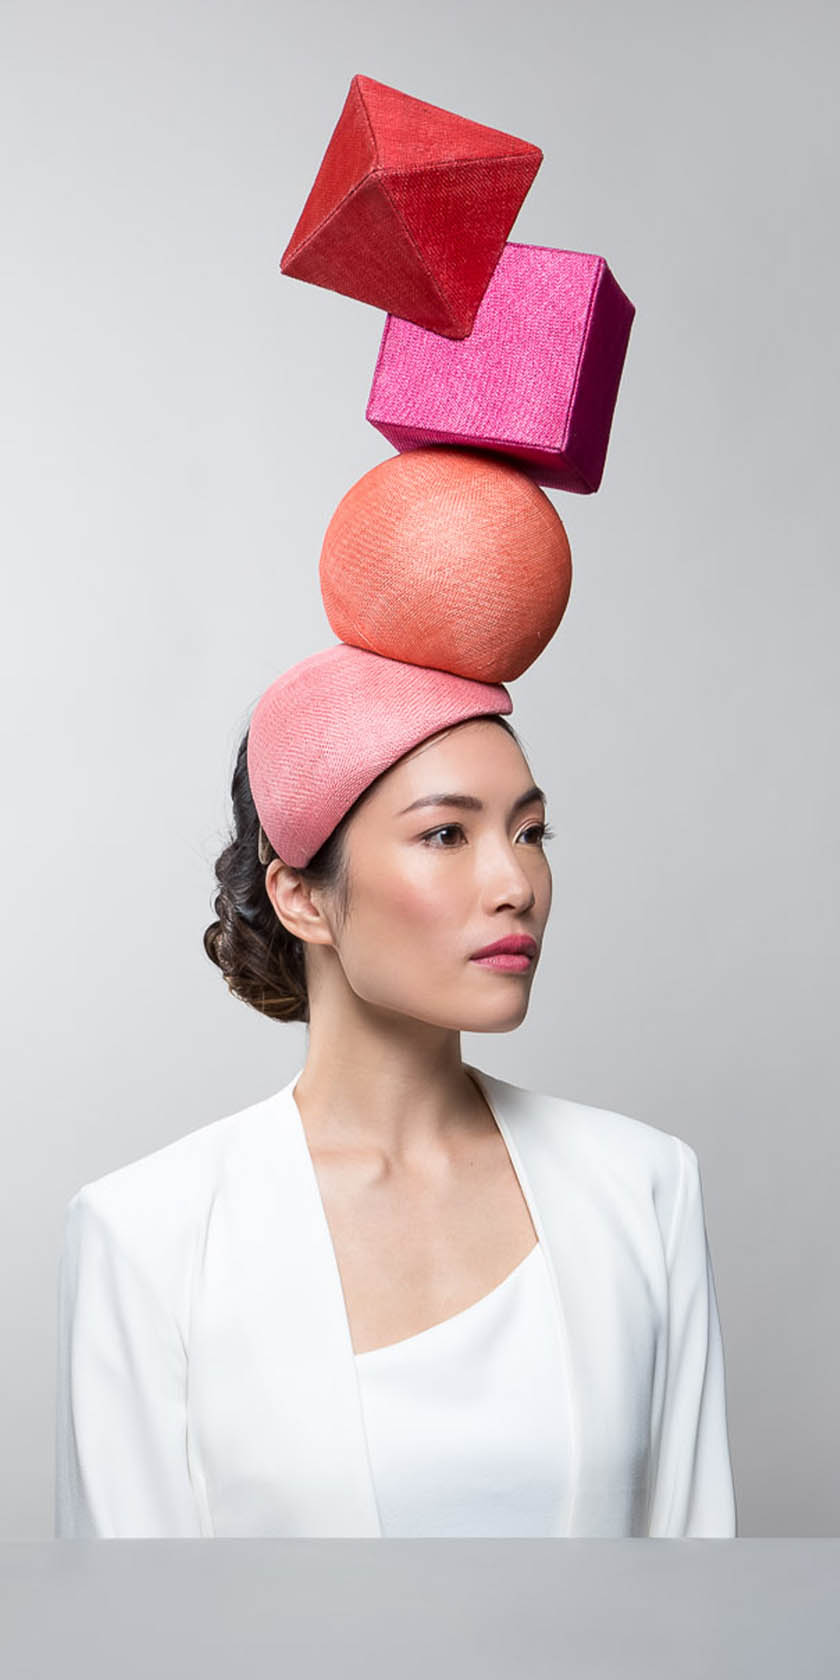 Counter Balance by Lauren J Ritchie Millinery. Photo by Richard Shaw